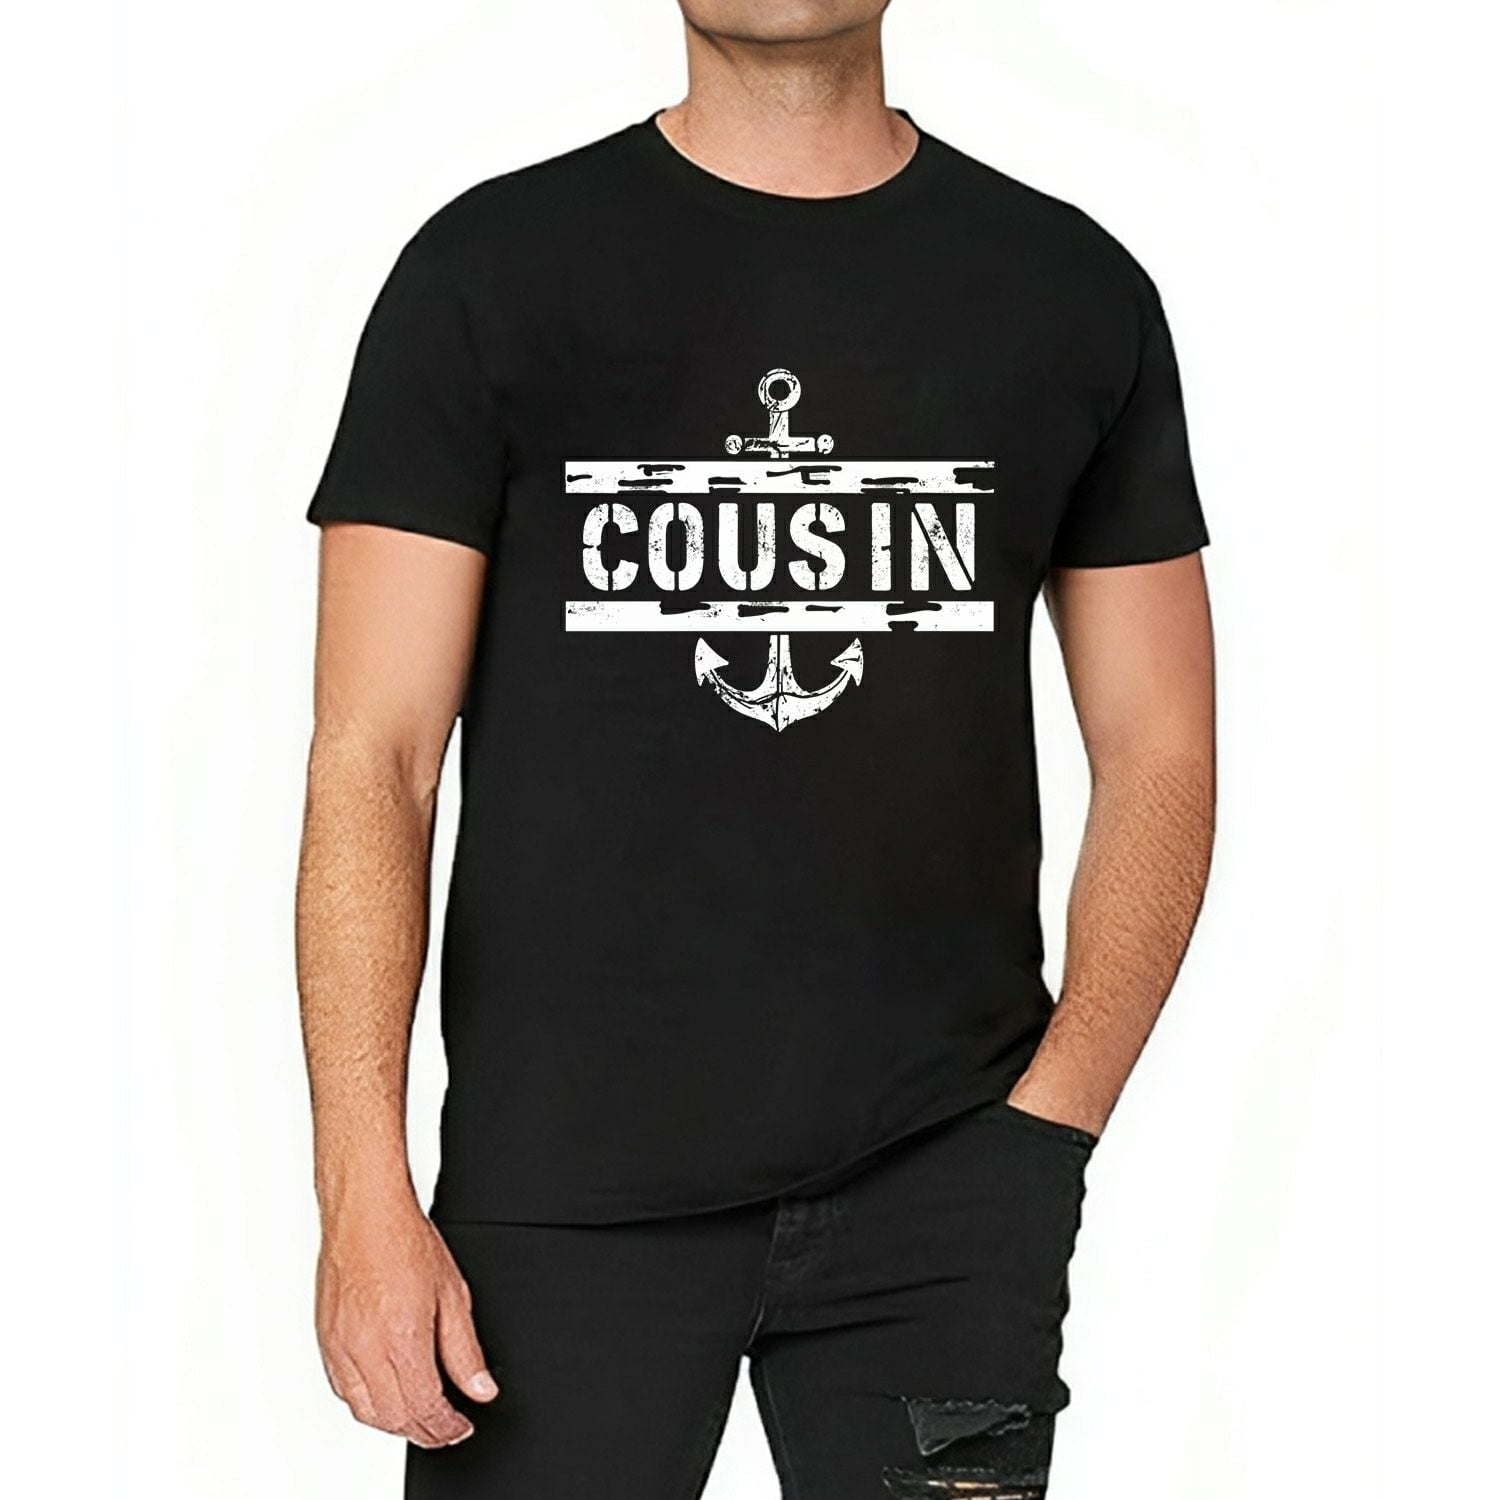 Mens Cousin crew cruise summer vacation Vintage T-Shirts Black Large ...